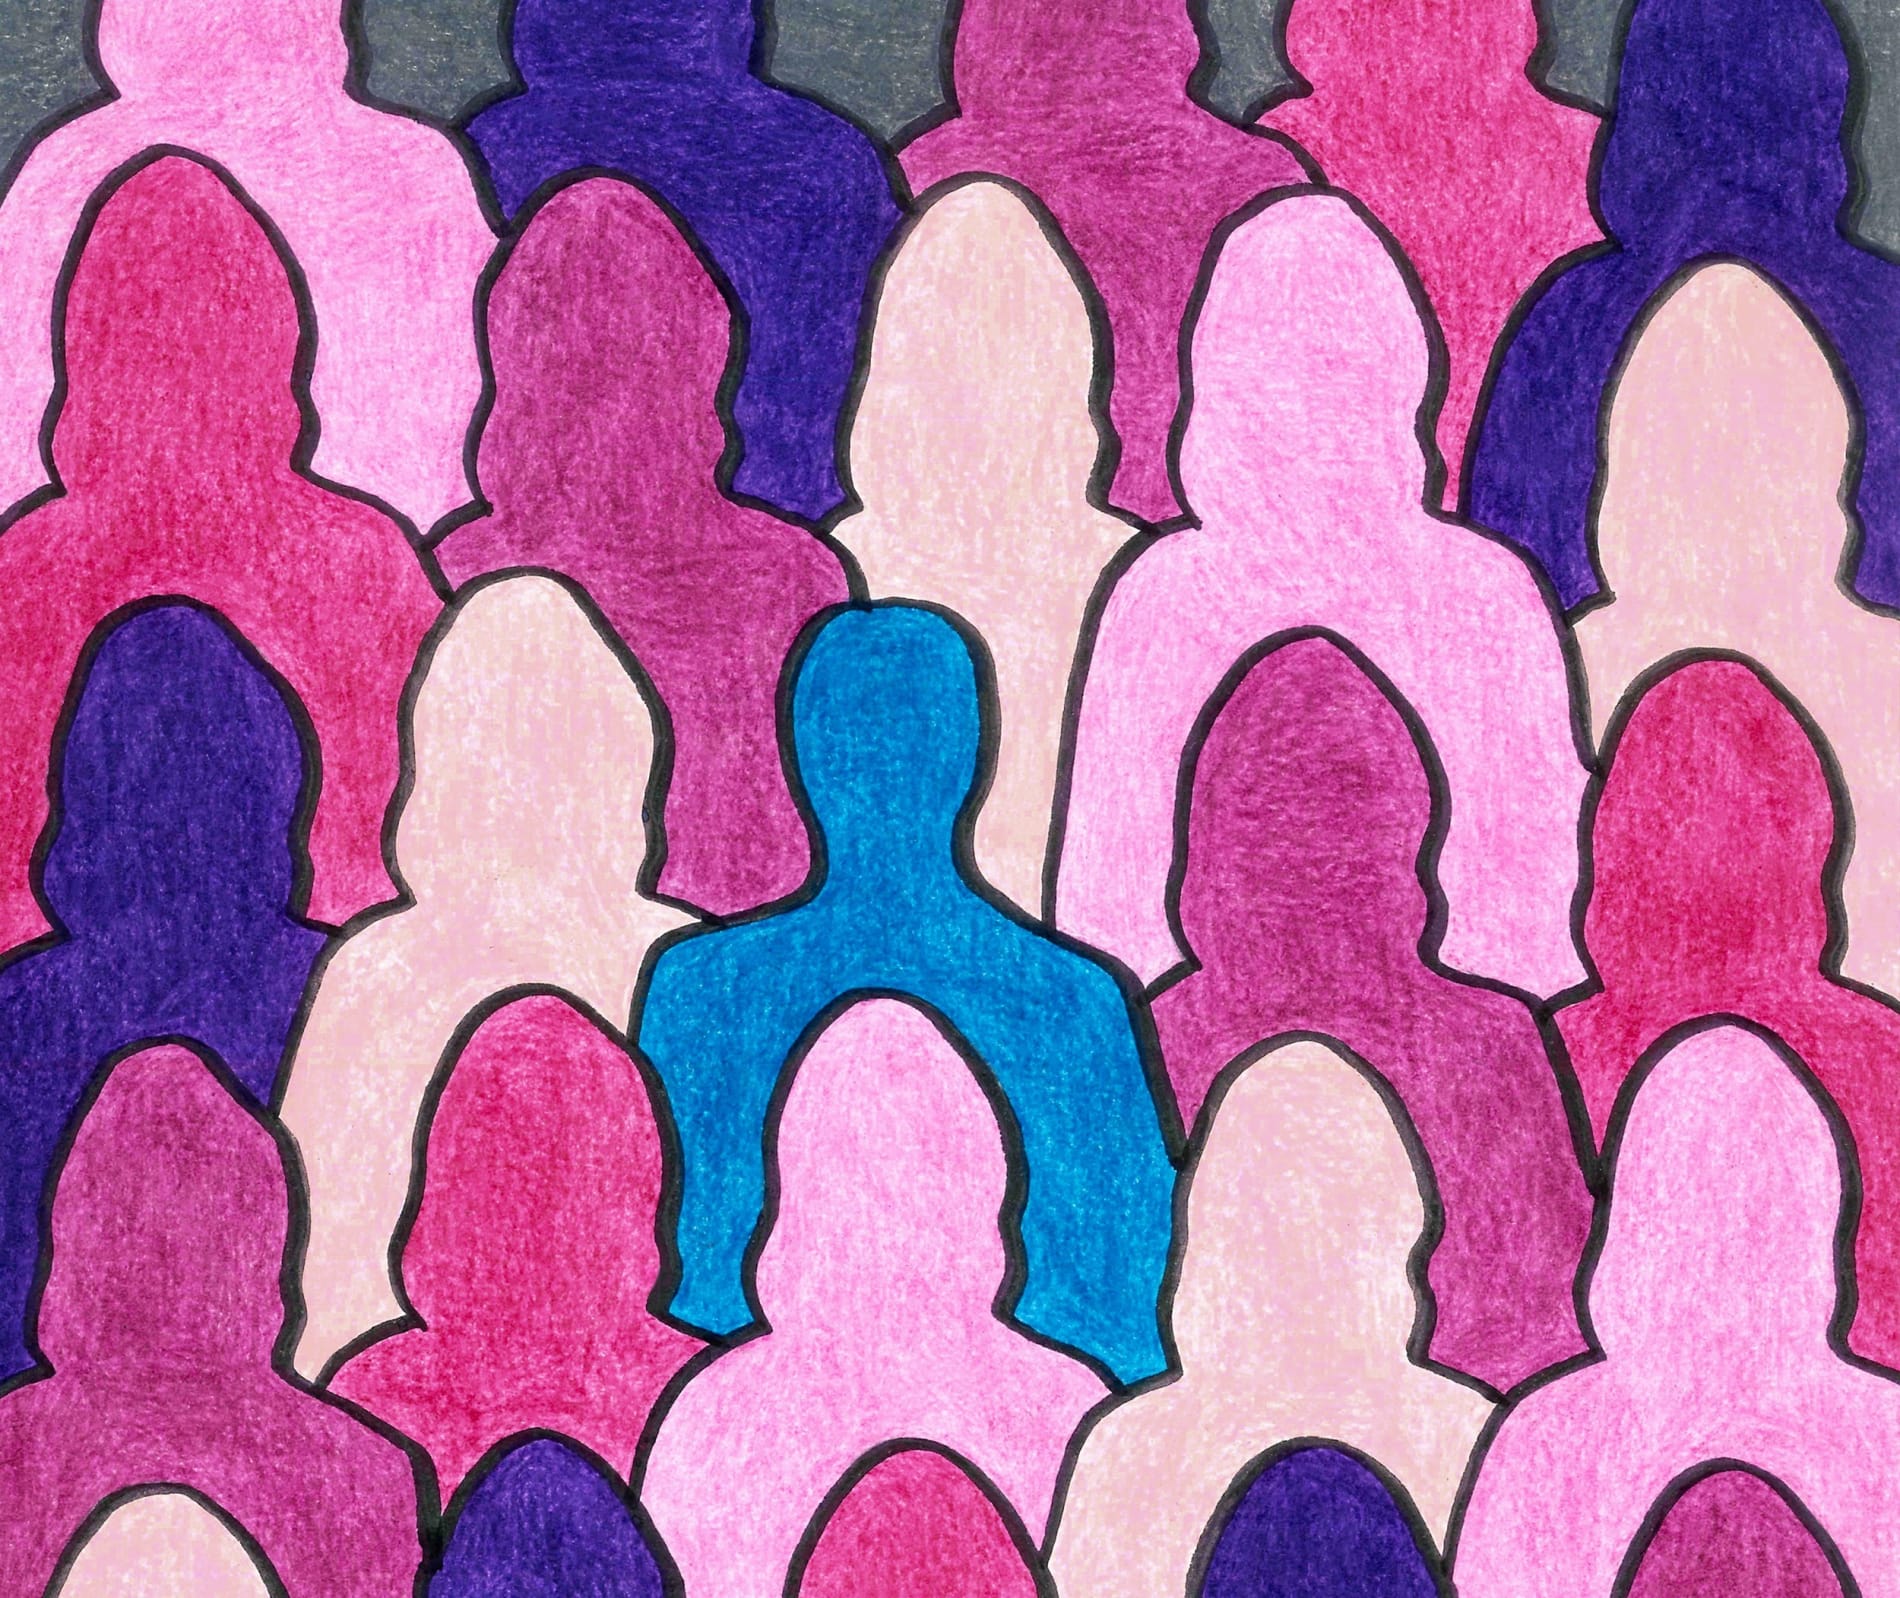 Pencil drawing of a blue man silhouette surrounded by pink and purple silhouettes of women